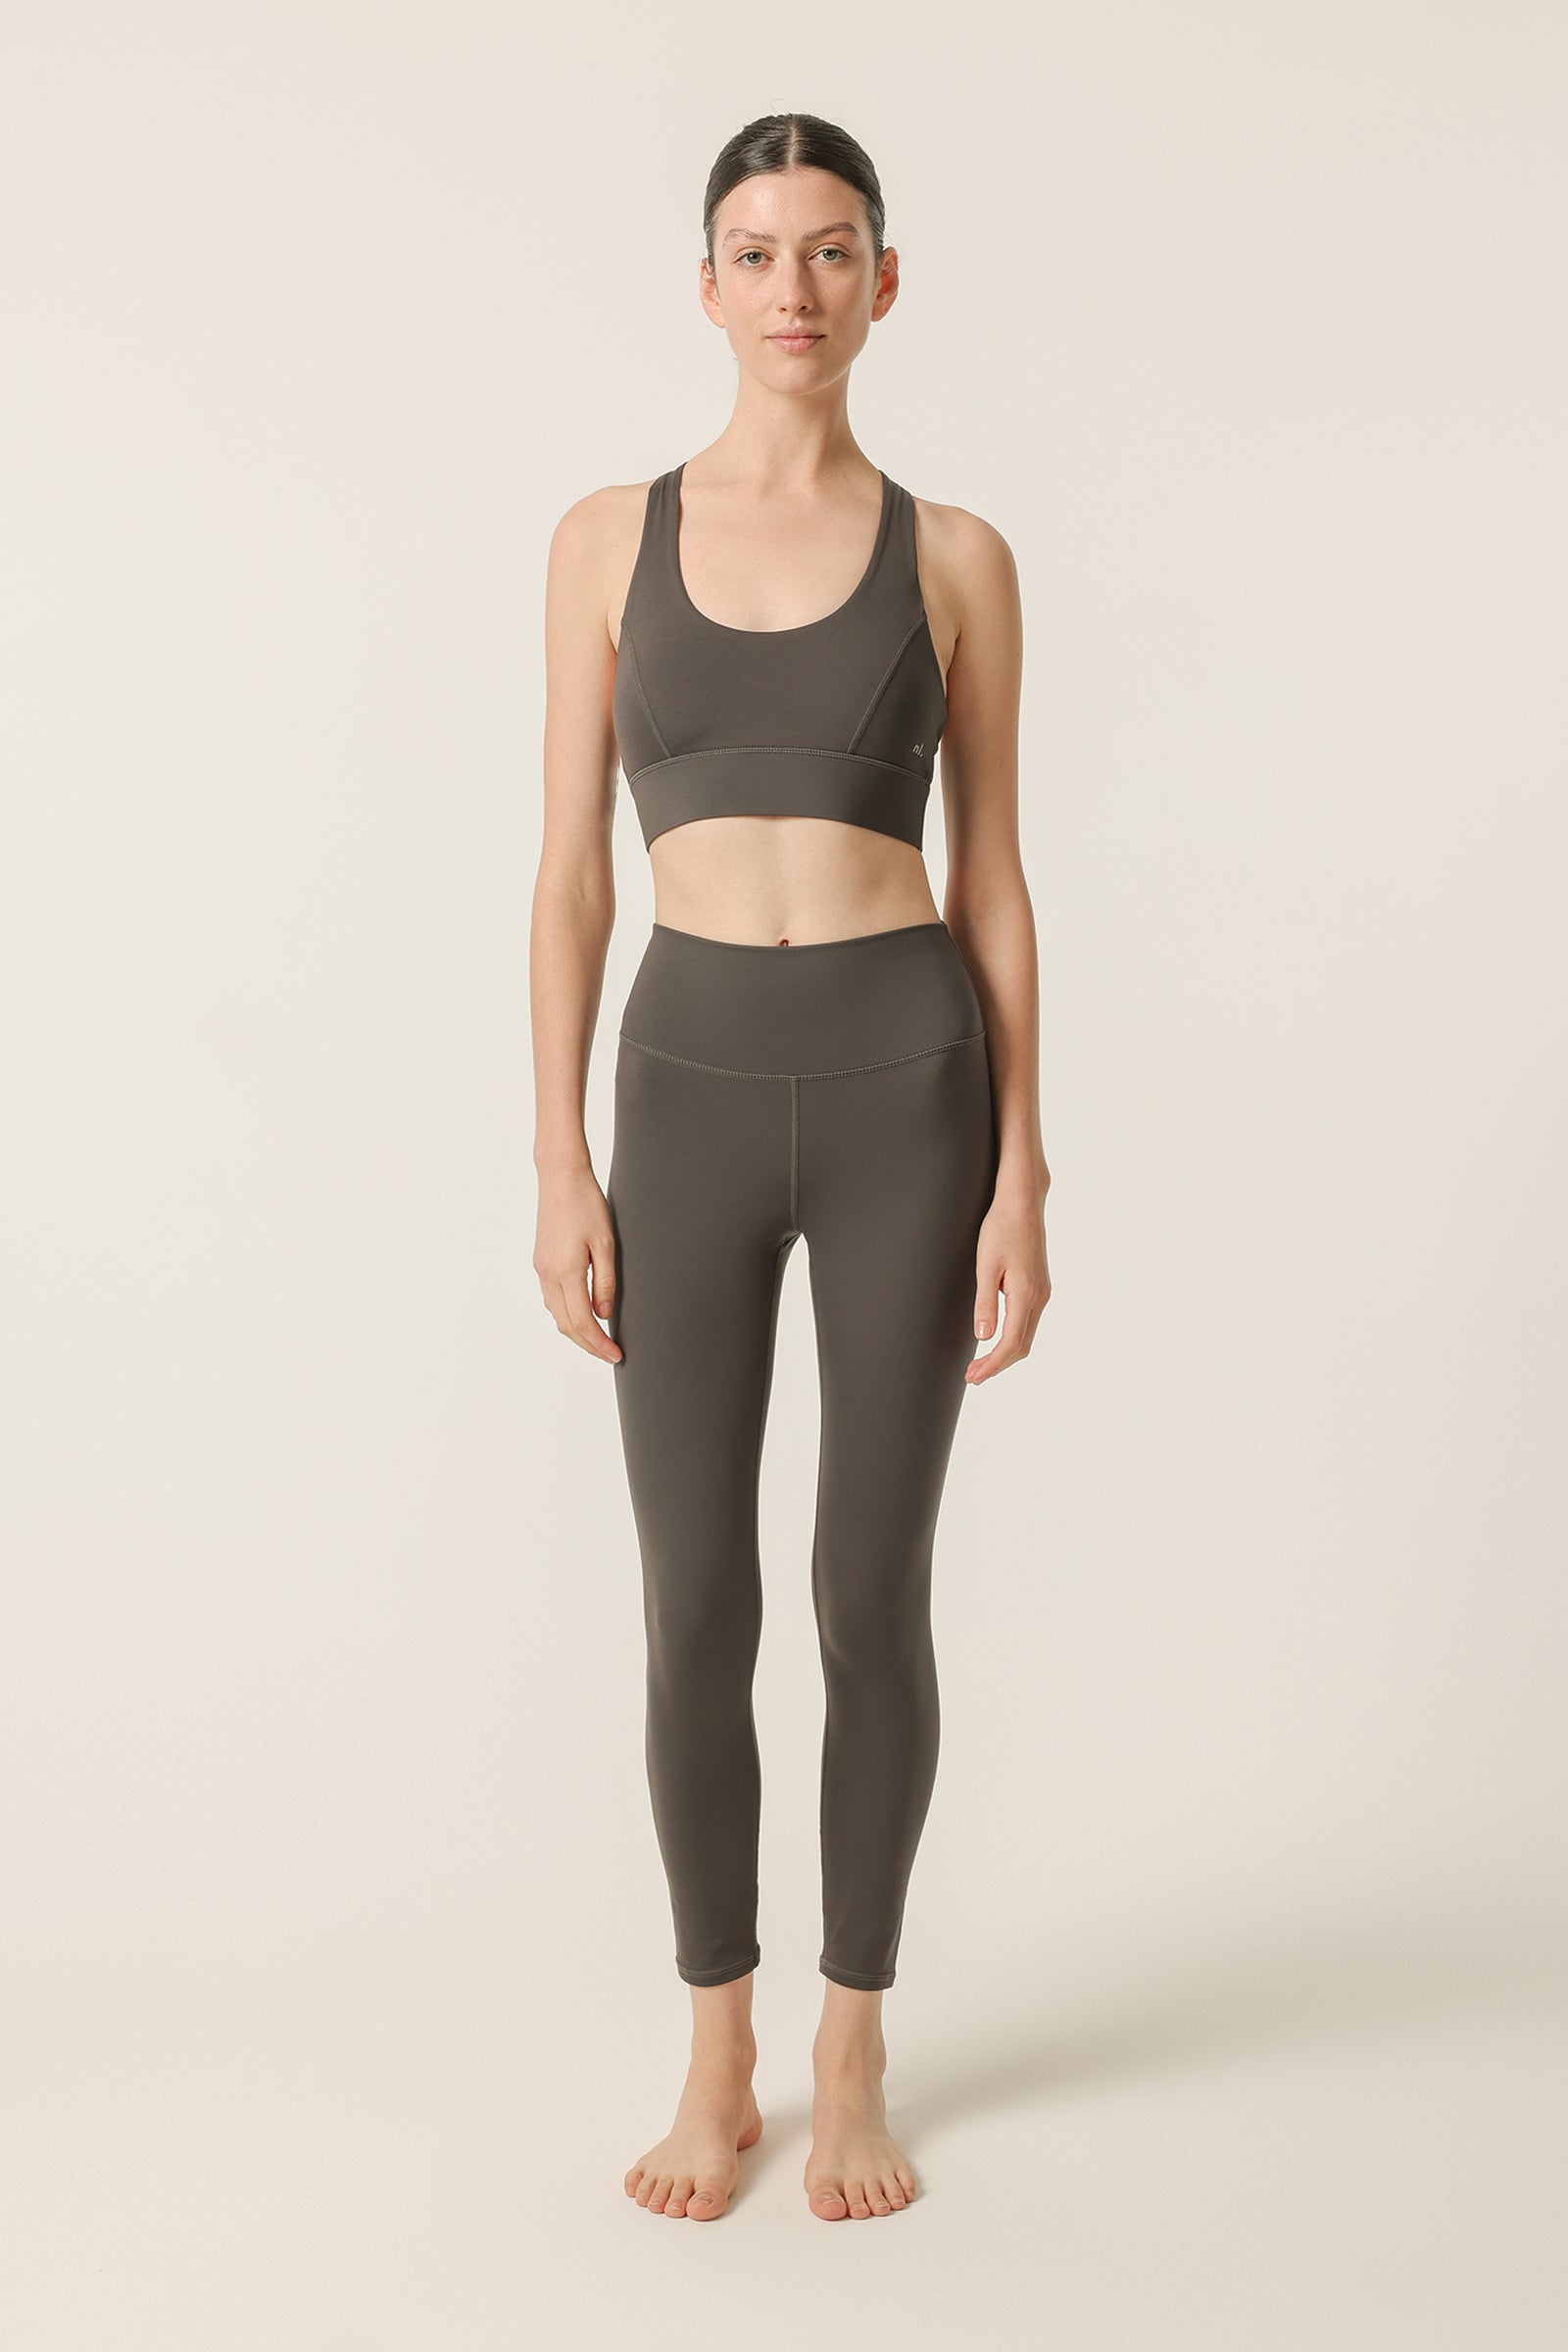 Shop Nude Active 7/8 Tights in Coal